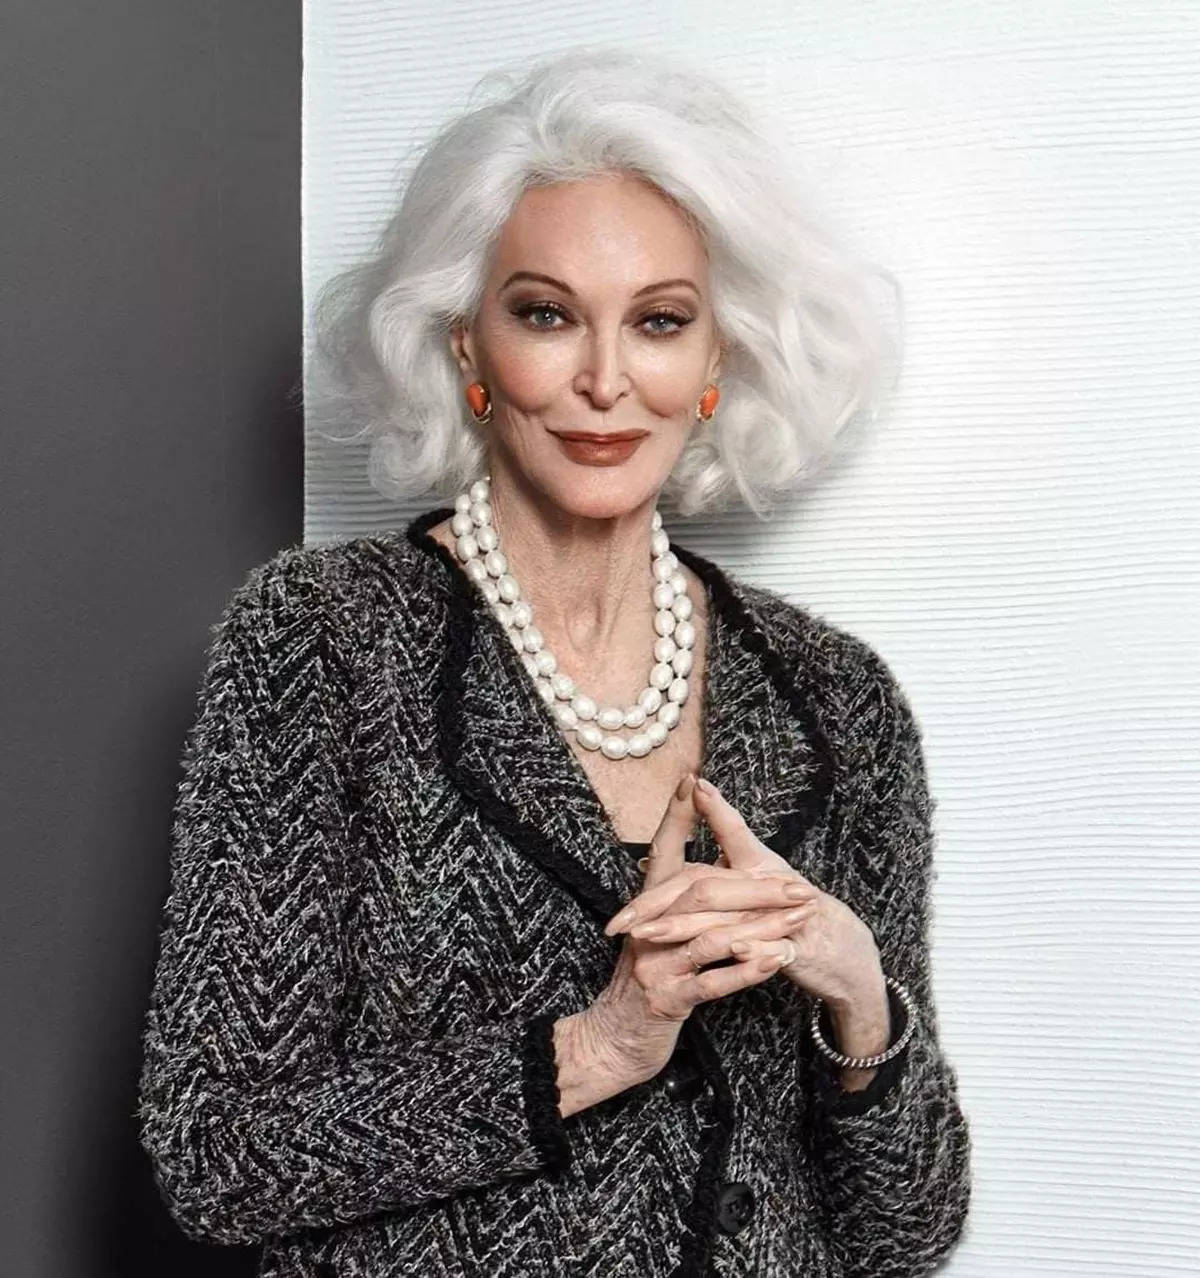 91-year-old Carmen Dell'Orefice, the world's oldest supermodel, stuns in a  bold shoot | Photogallery - ETimes